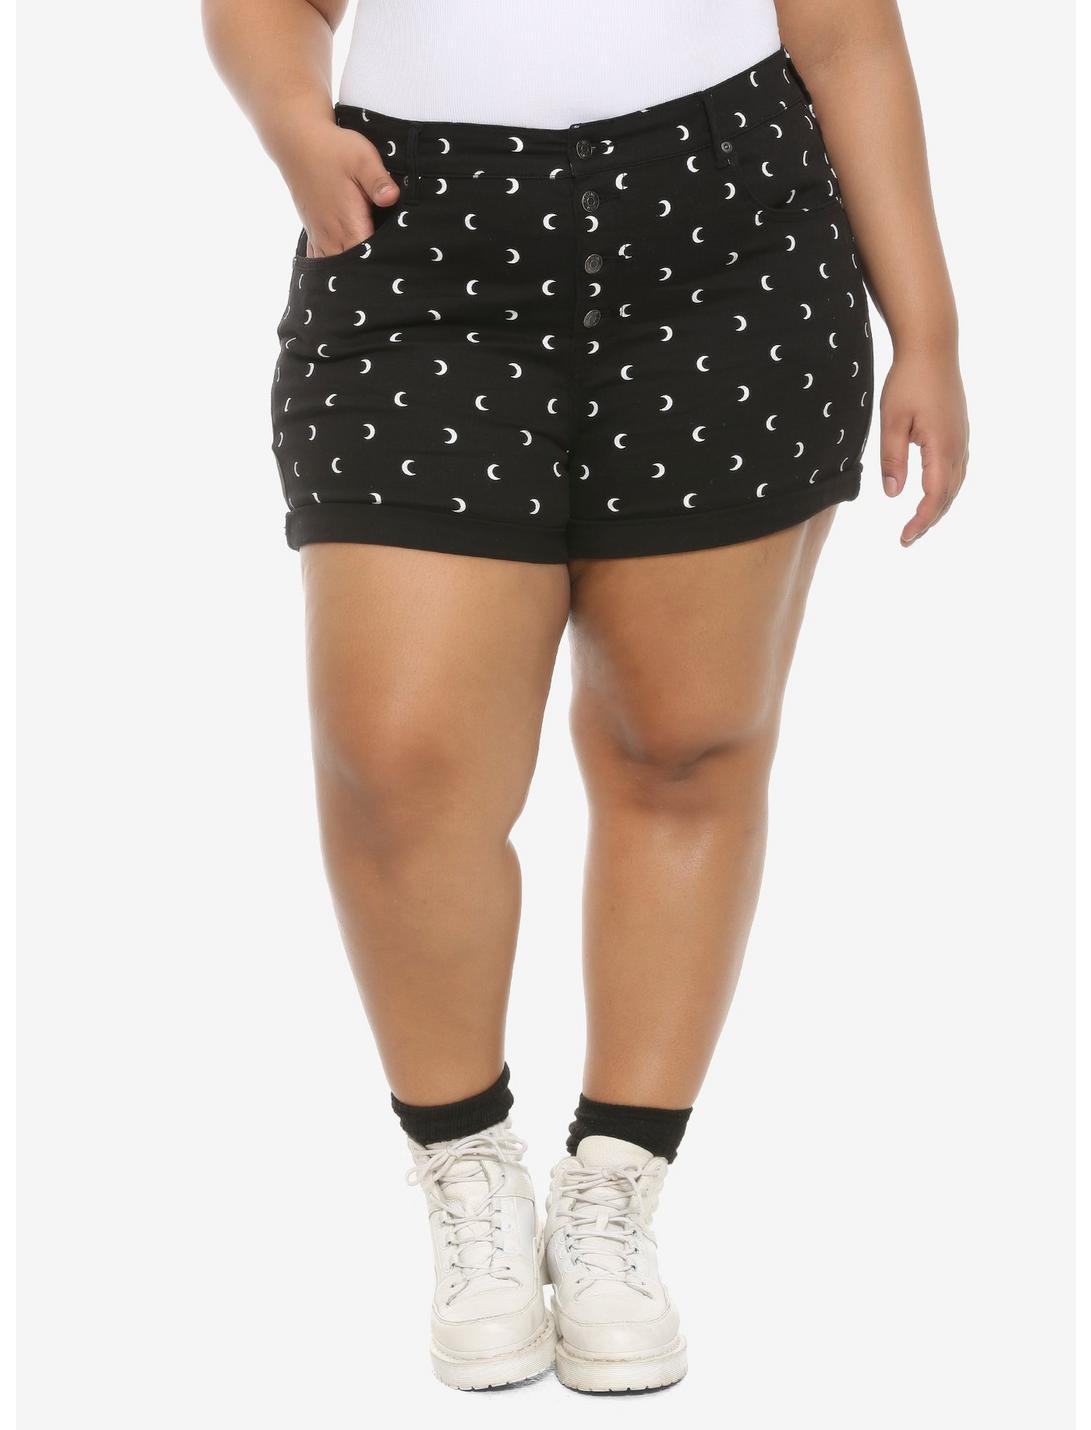 HT Denim Moon Print Ultra Hi-Rise Button-Front Shorts Plus Size, MOON AND STARS, hi-res